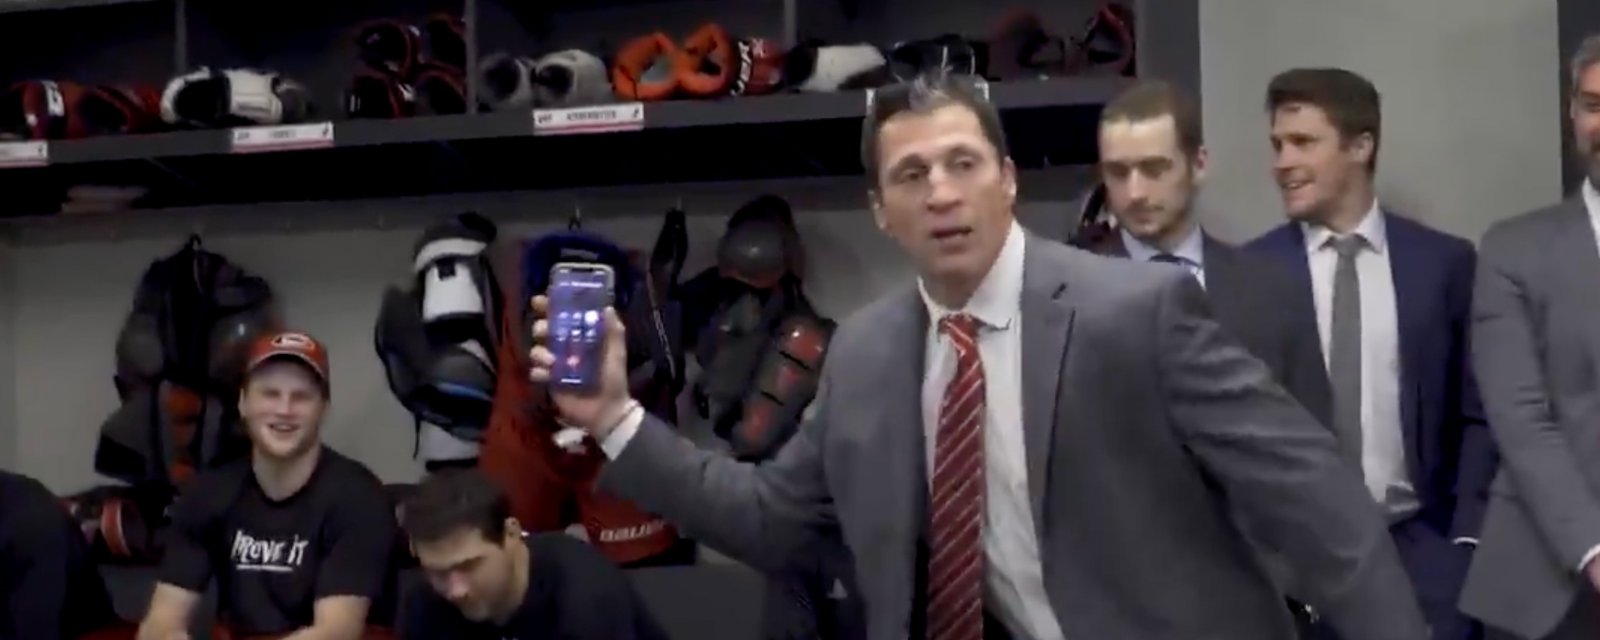 Brind’Amour shares OT win with his sick dad as dressing room celebrates in emotional video 